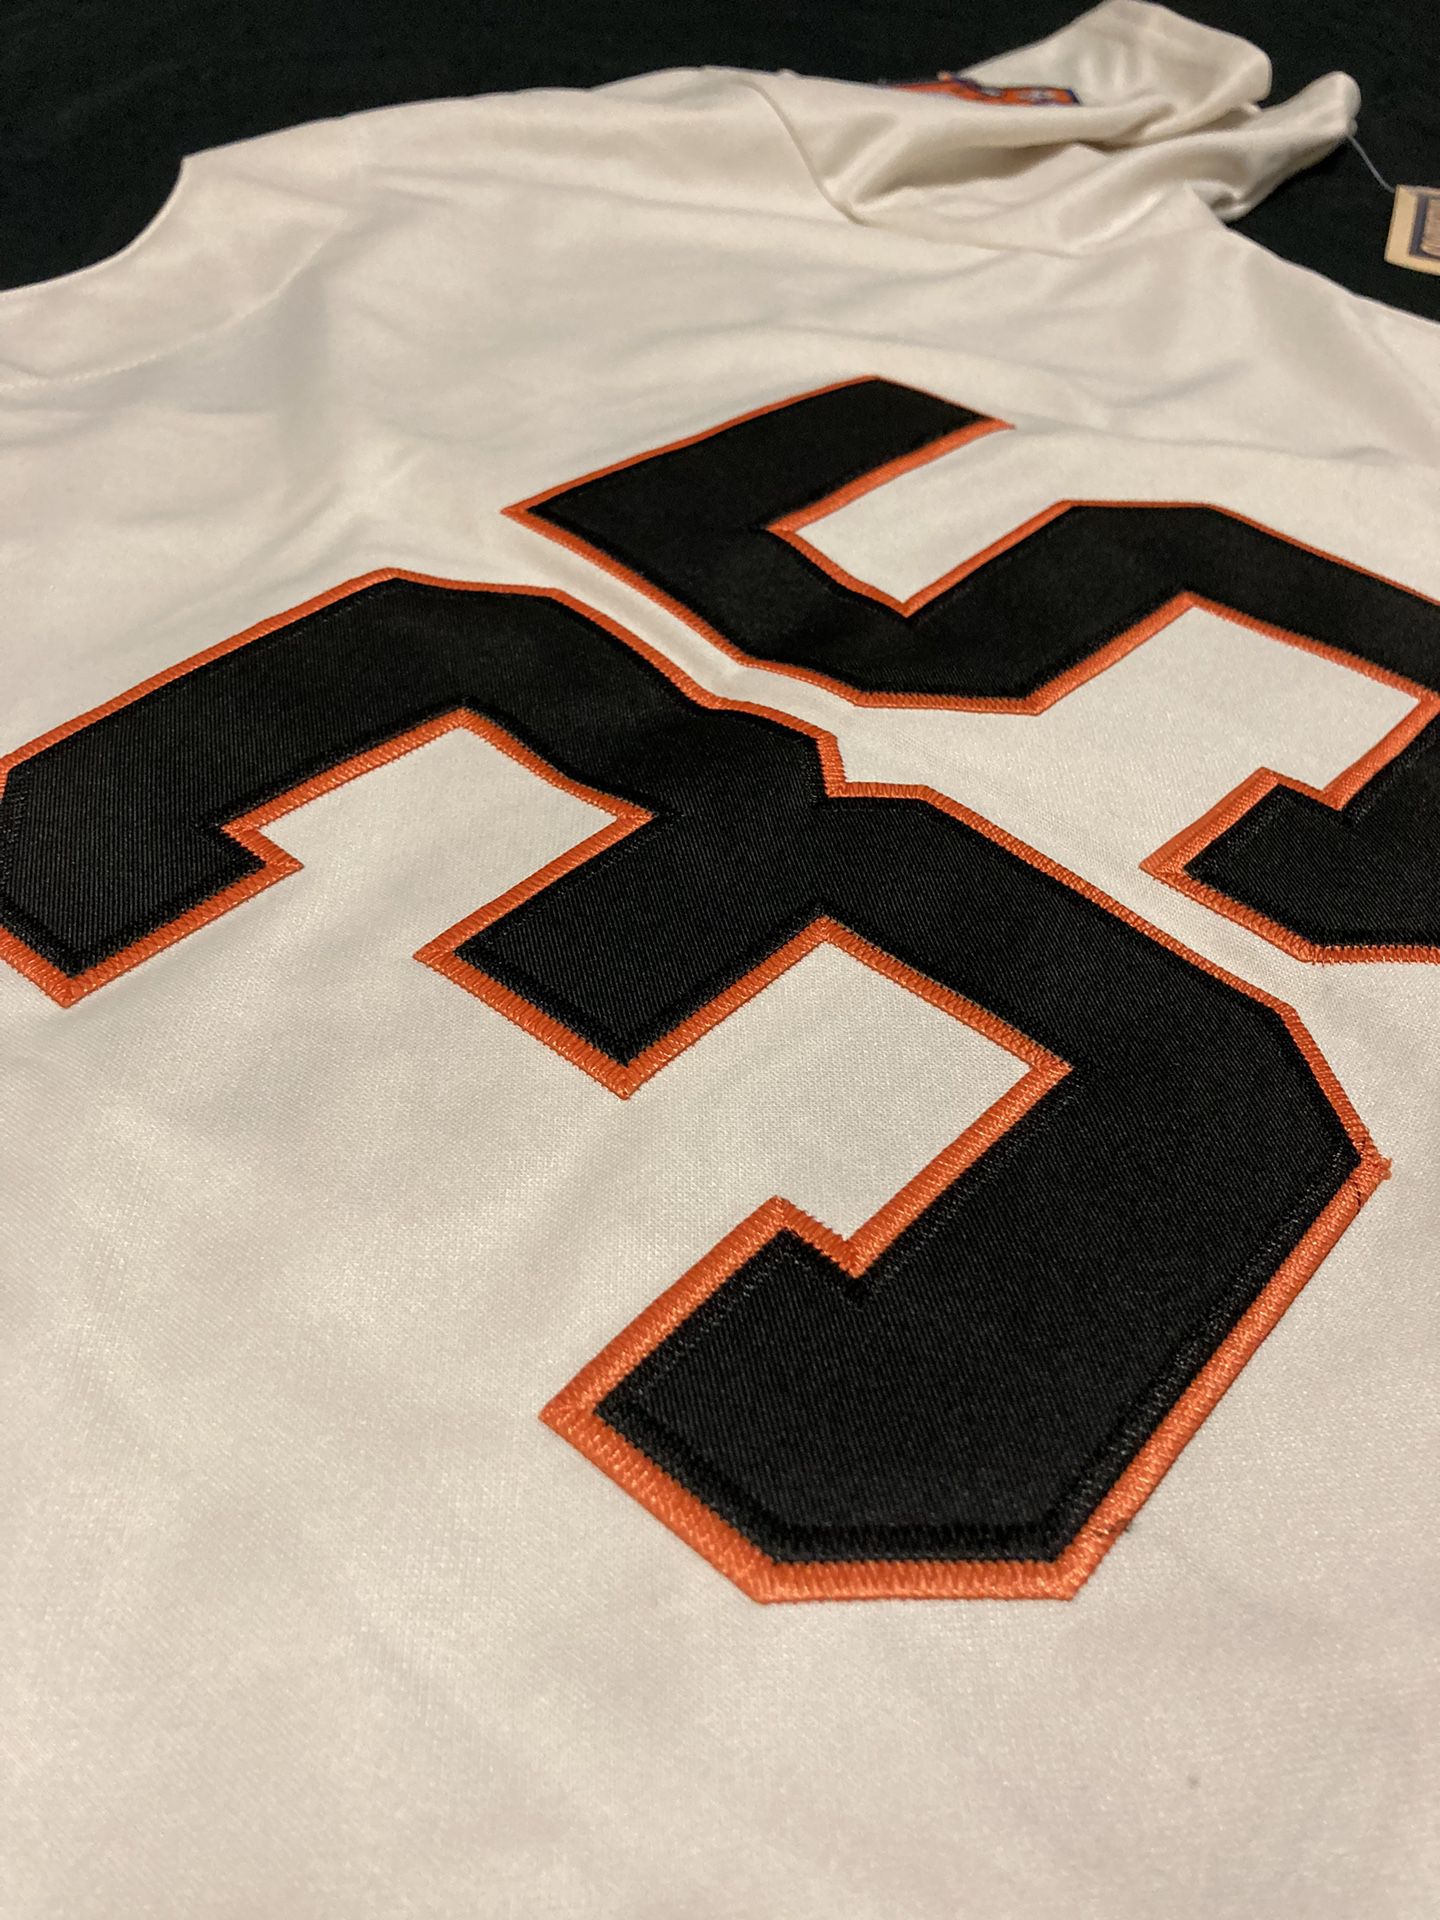 Astros to bring backs Colt .45s jersey this season - Ballpark Digest